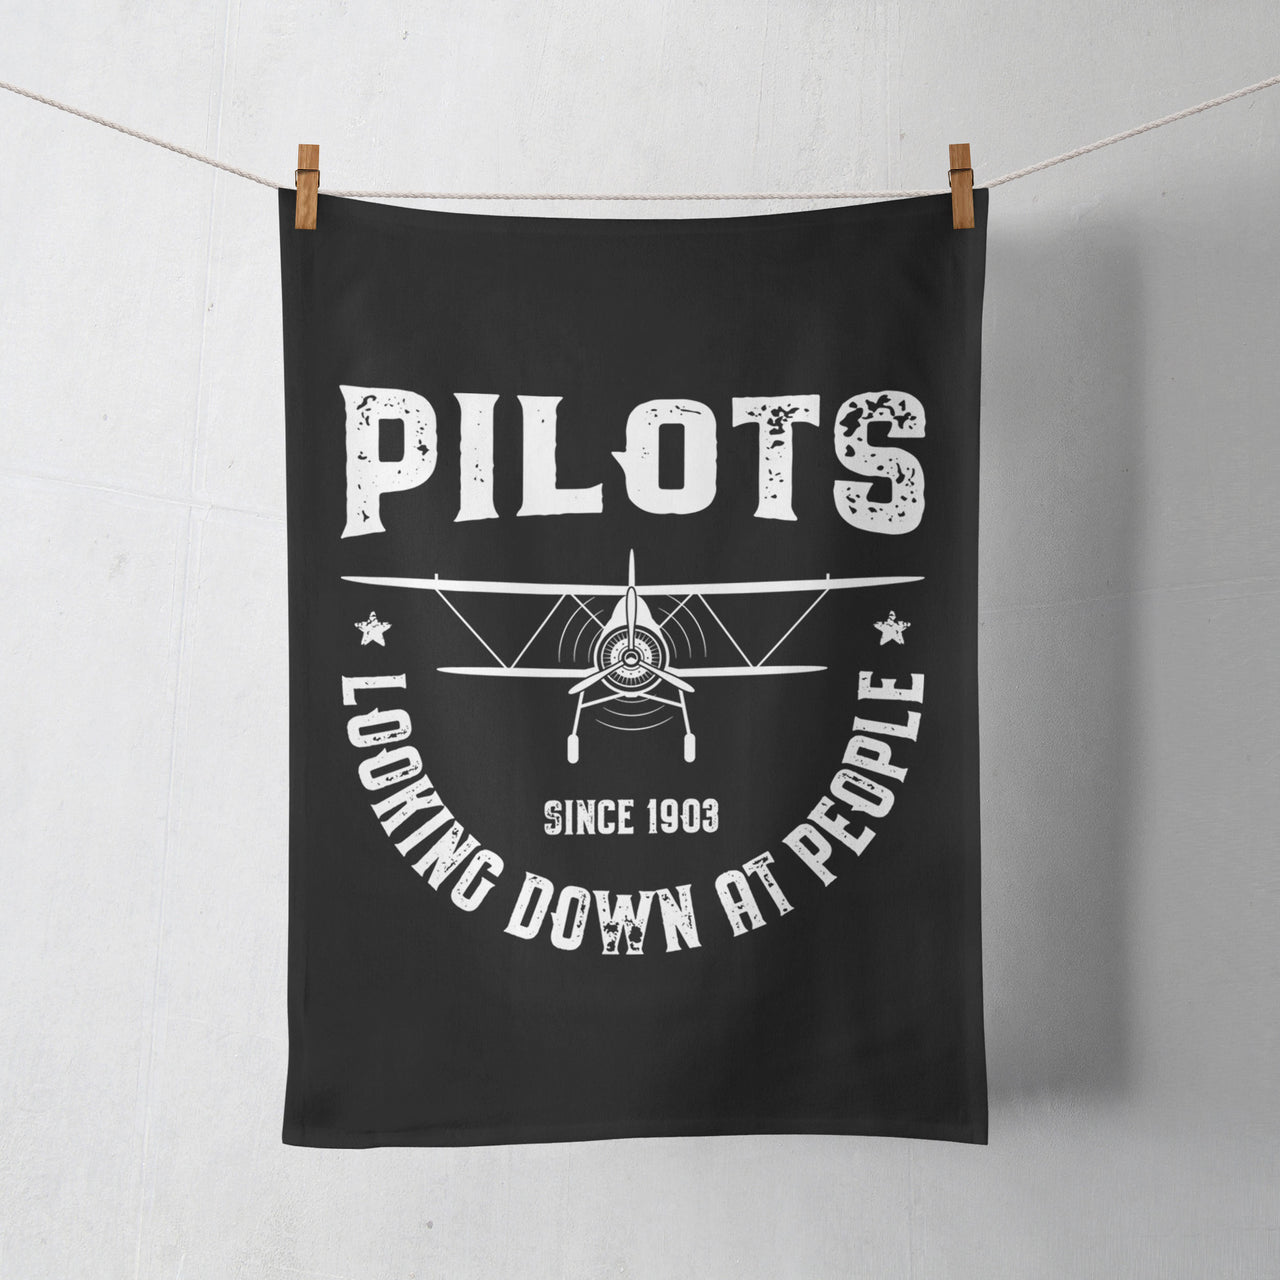 Pilots Looking Down at People Since 1903 Designed Towels